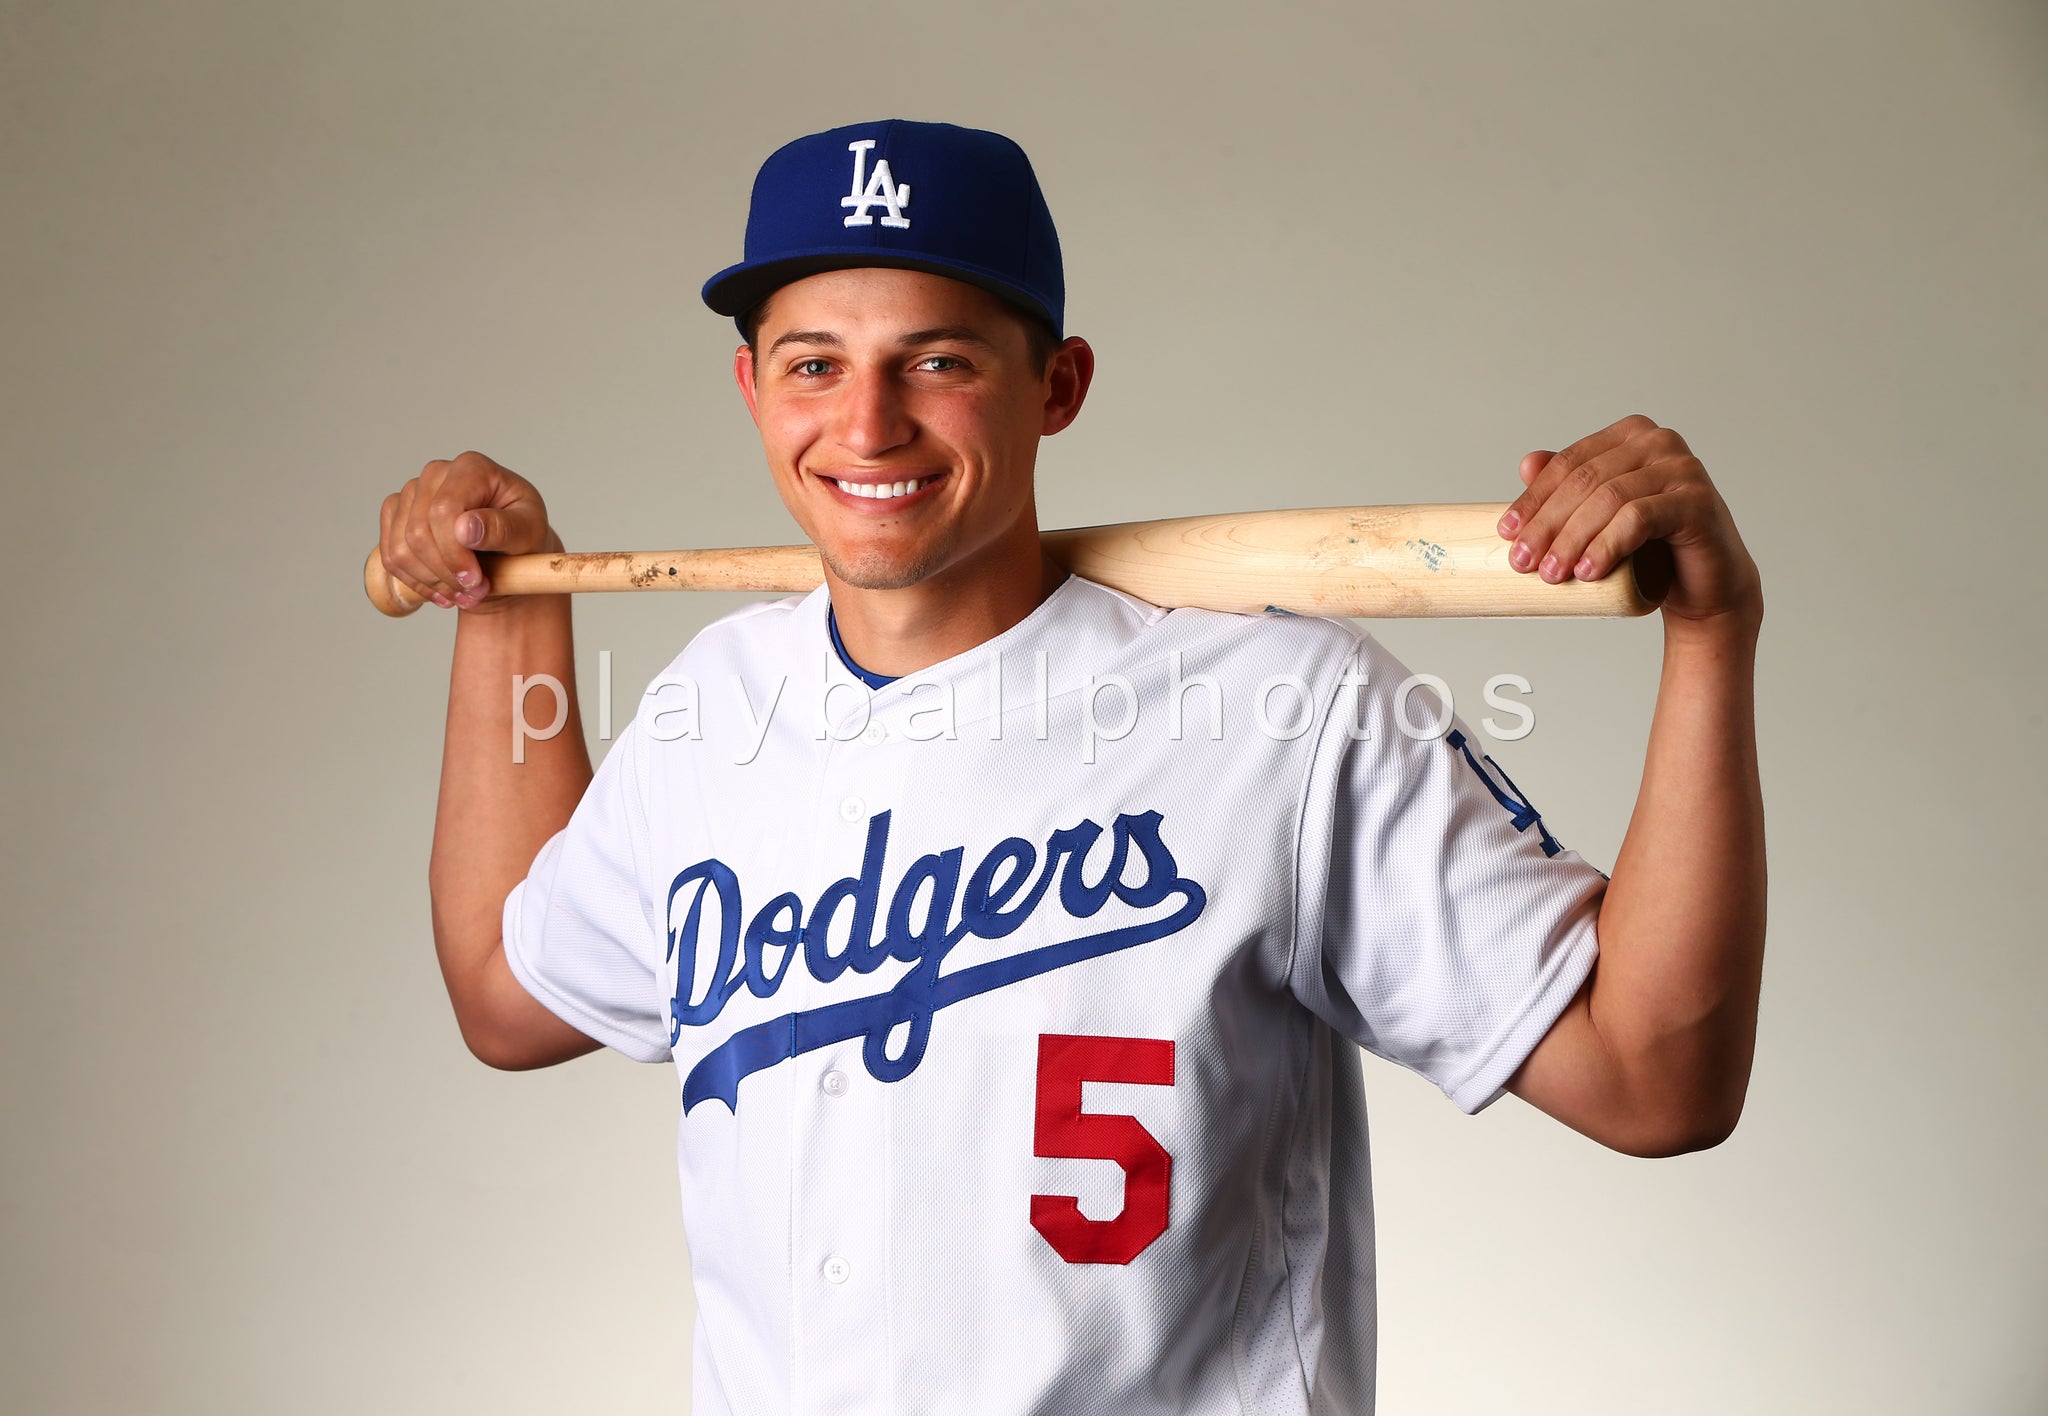 seager3